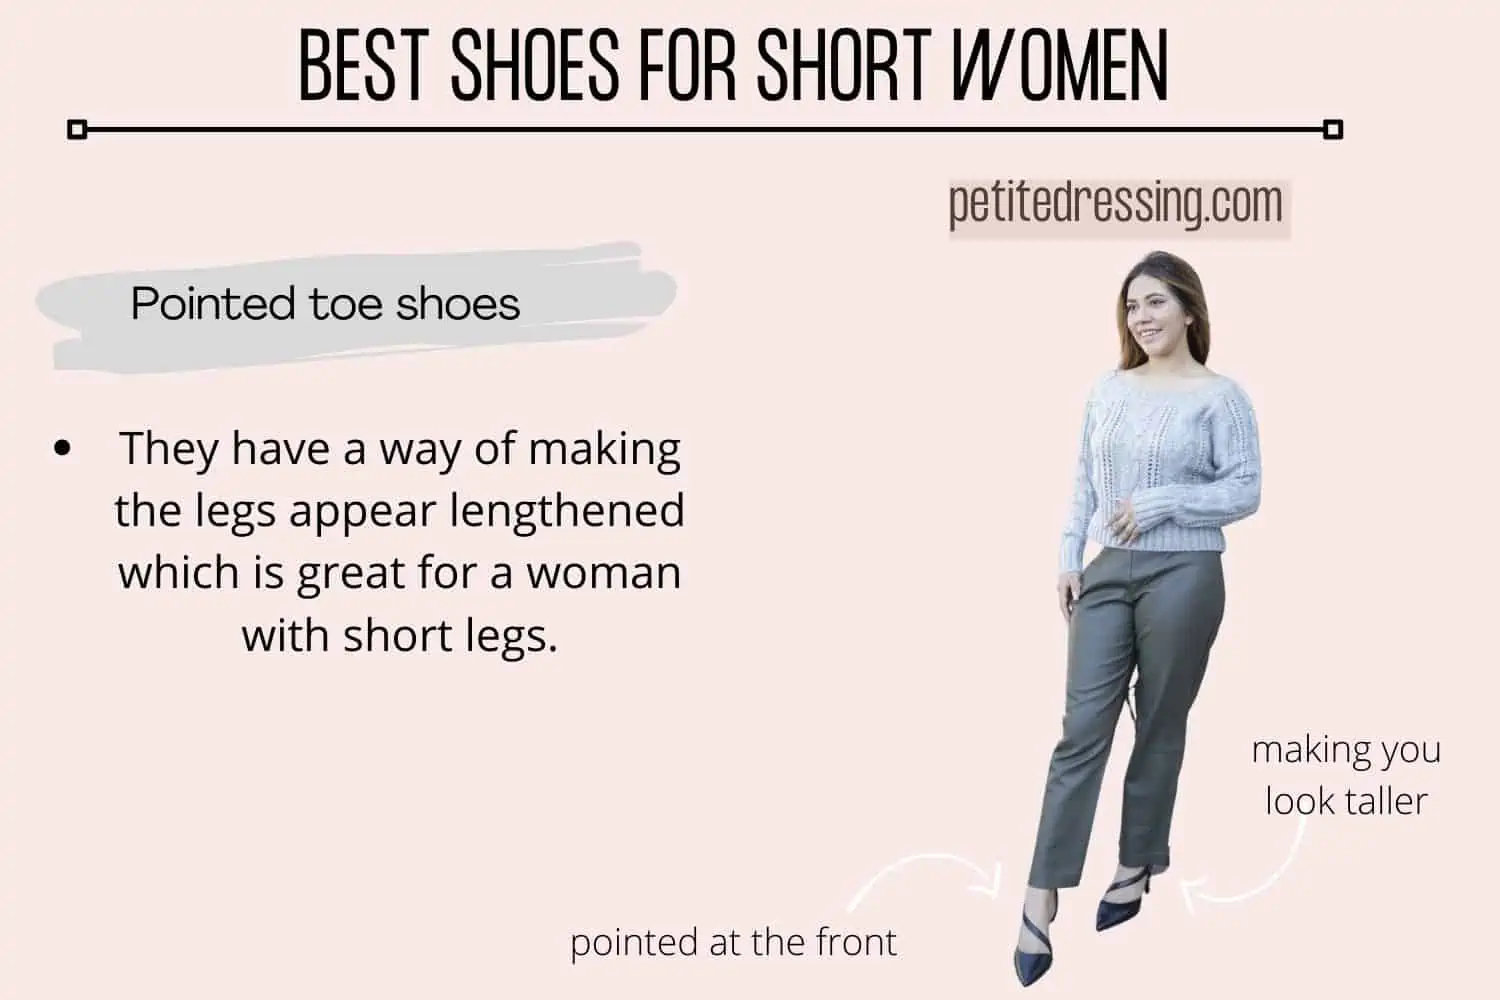 How To Make Yourself Look Taller With Shoes - INSCMagazine